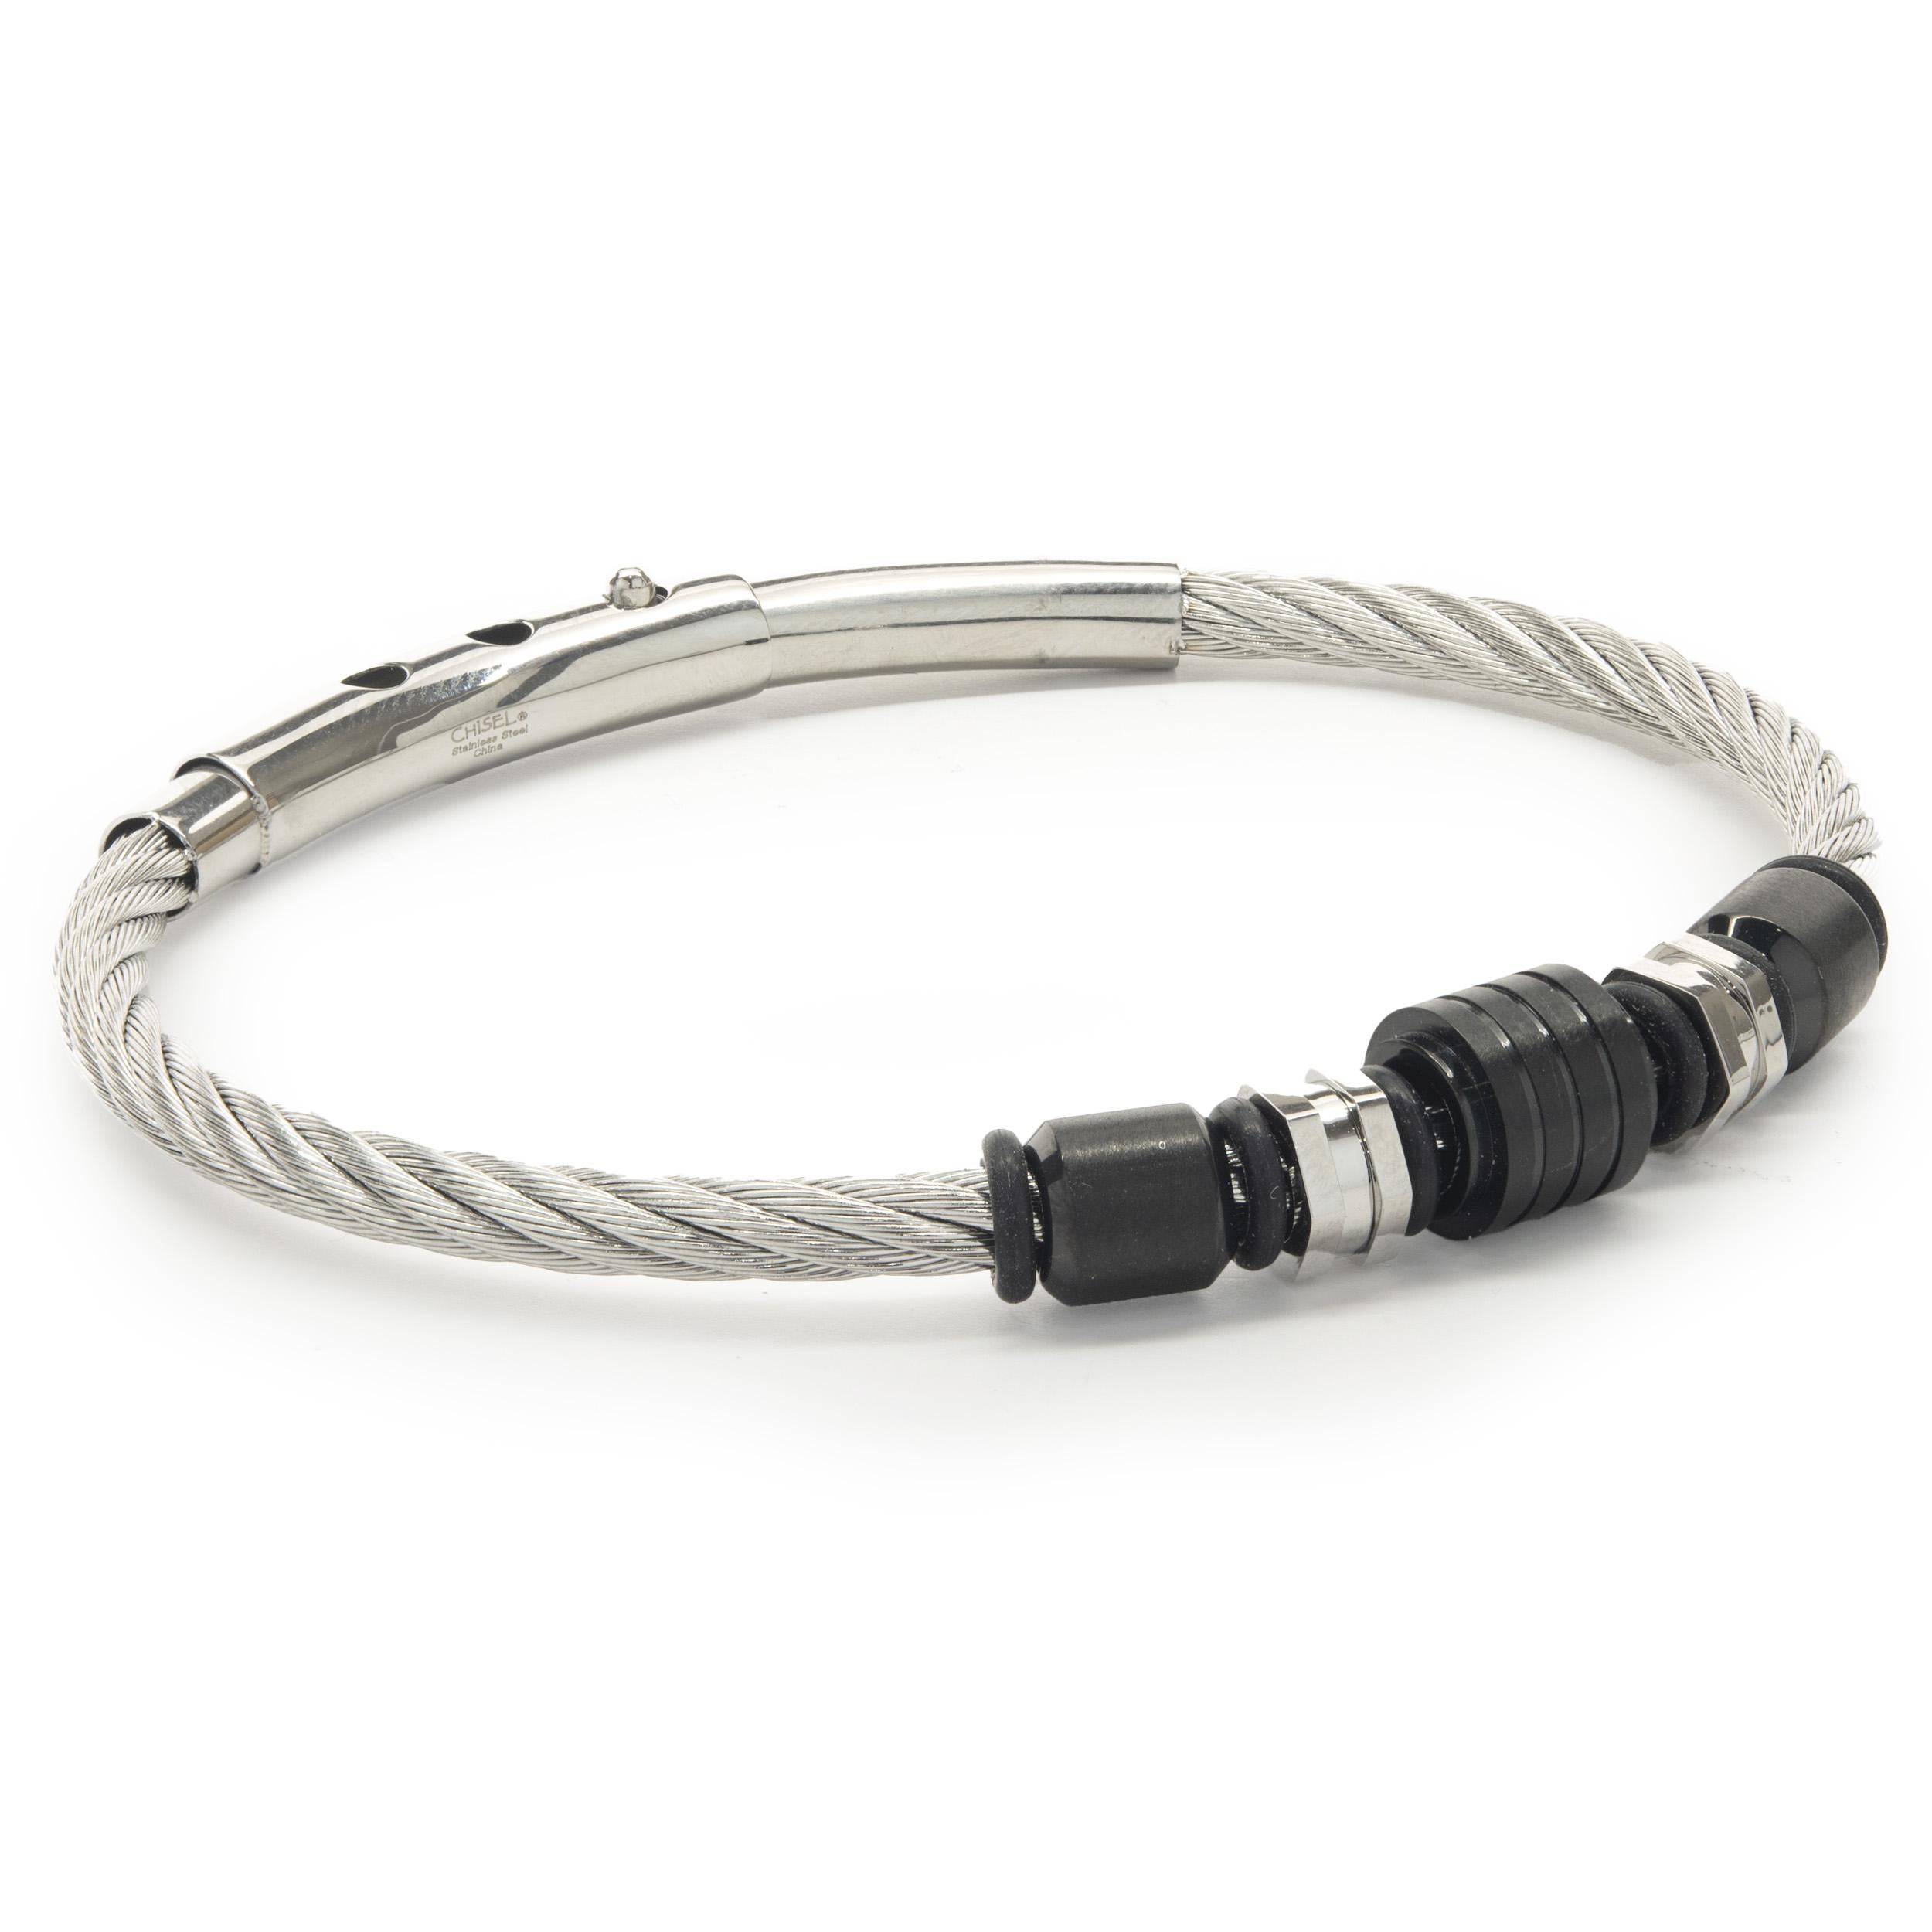 Designer: custom 
Material: stainless steel
Dimensions: bracelet will fit up to a 7-inch wrist
Weight: 19.56 grams
